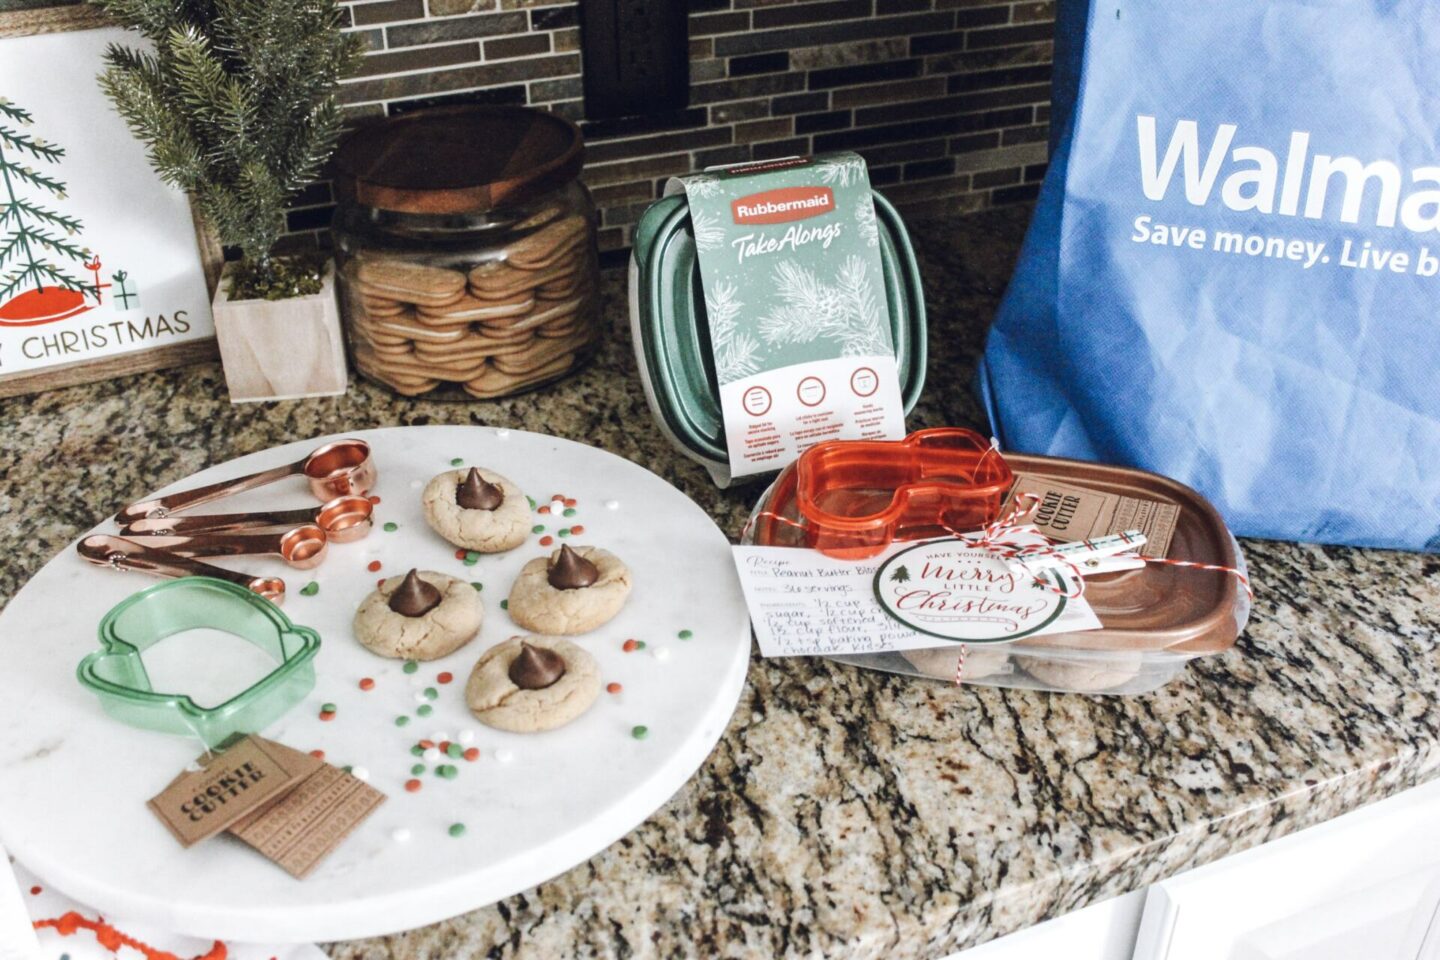 Christmas cookies, Gift Giving│Homemade Baked Goods and Cookie Baking Kits